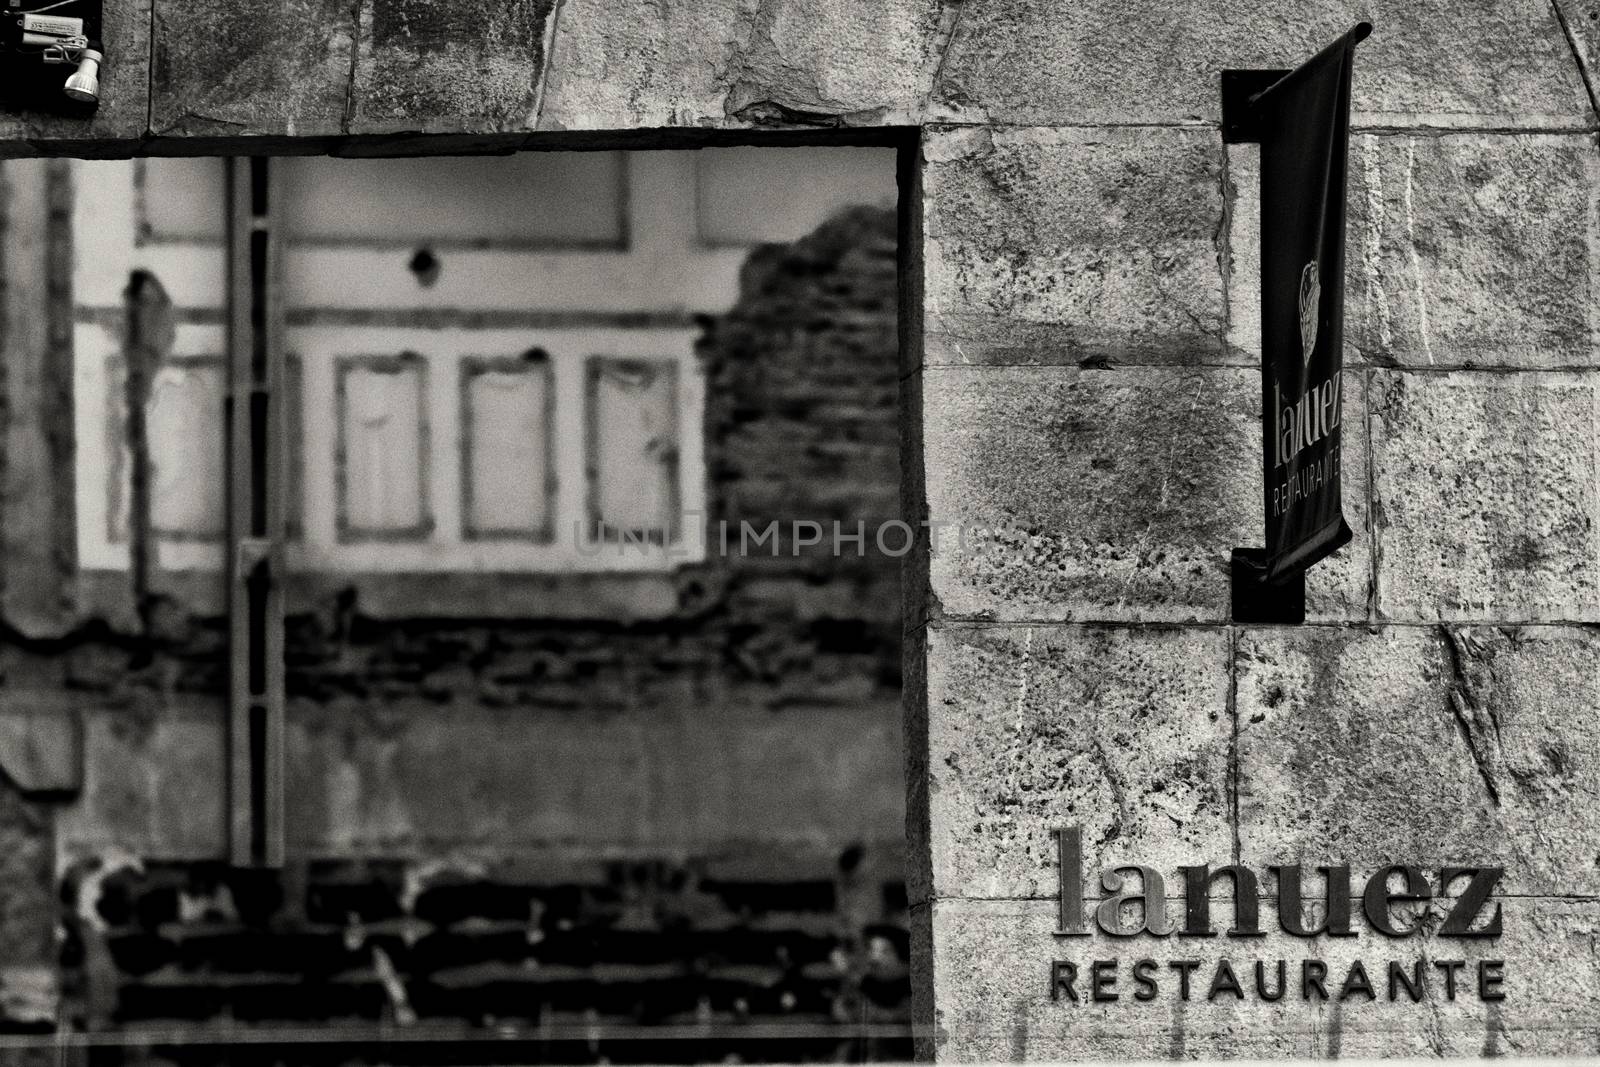 Demolition of The mythical restaurant La Nuez in Pamplona by mikelju